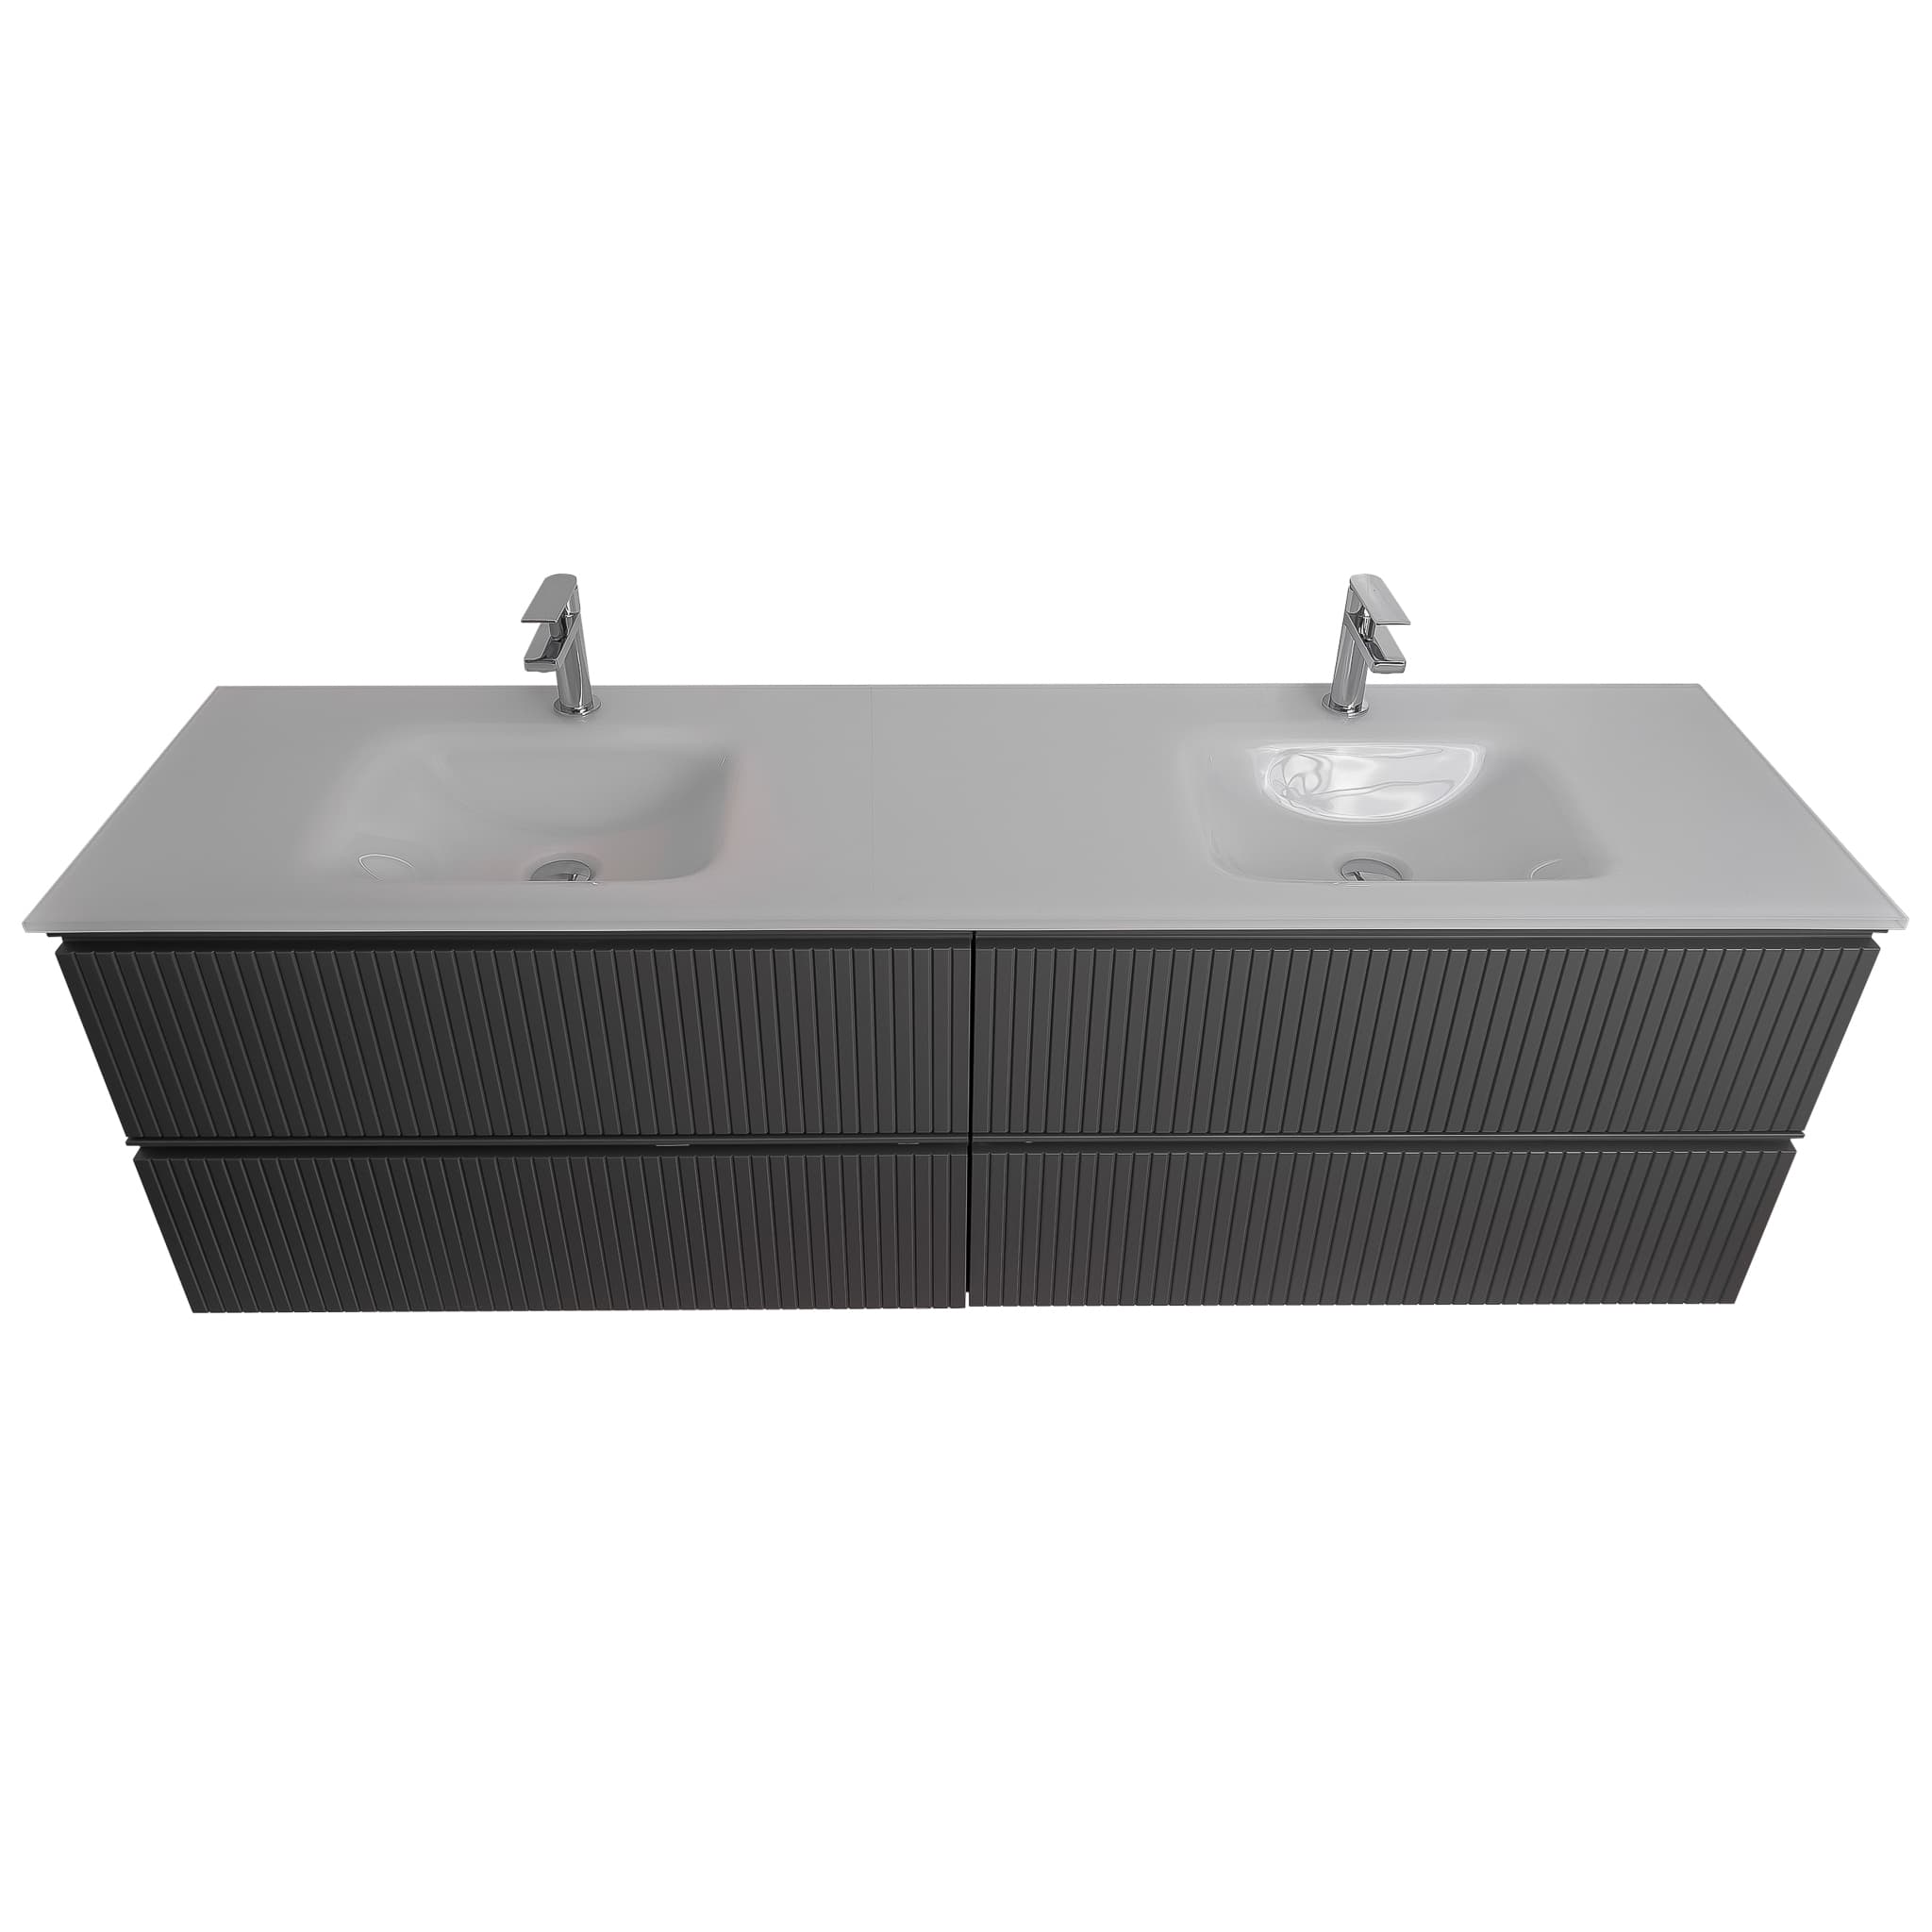 Ares 63 Matte Grey Cabinet, White Tempered Glass Double Sink, Wall Mounted Modern Vanity Set